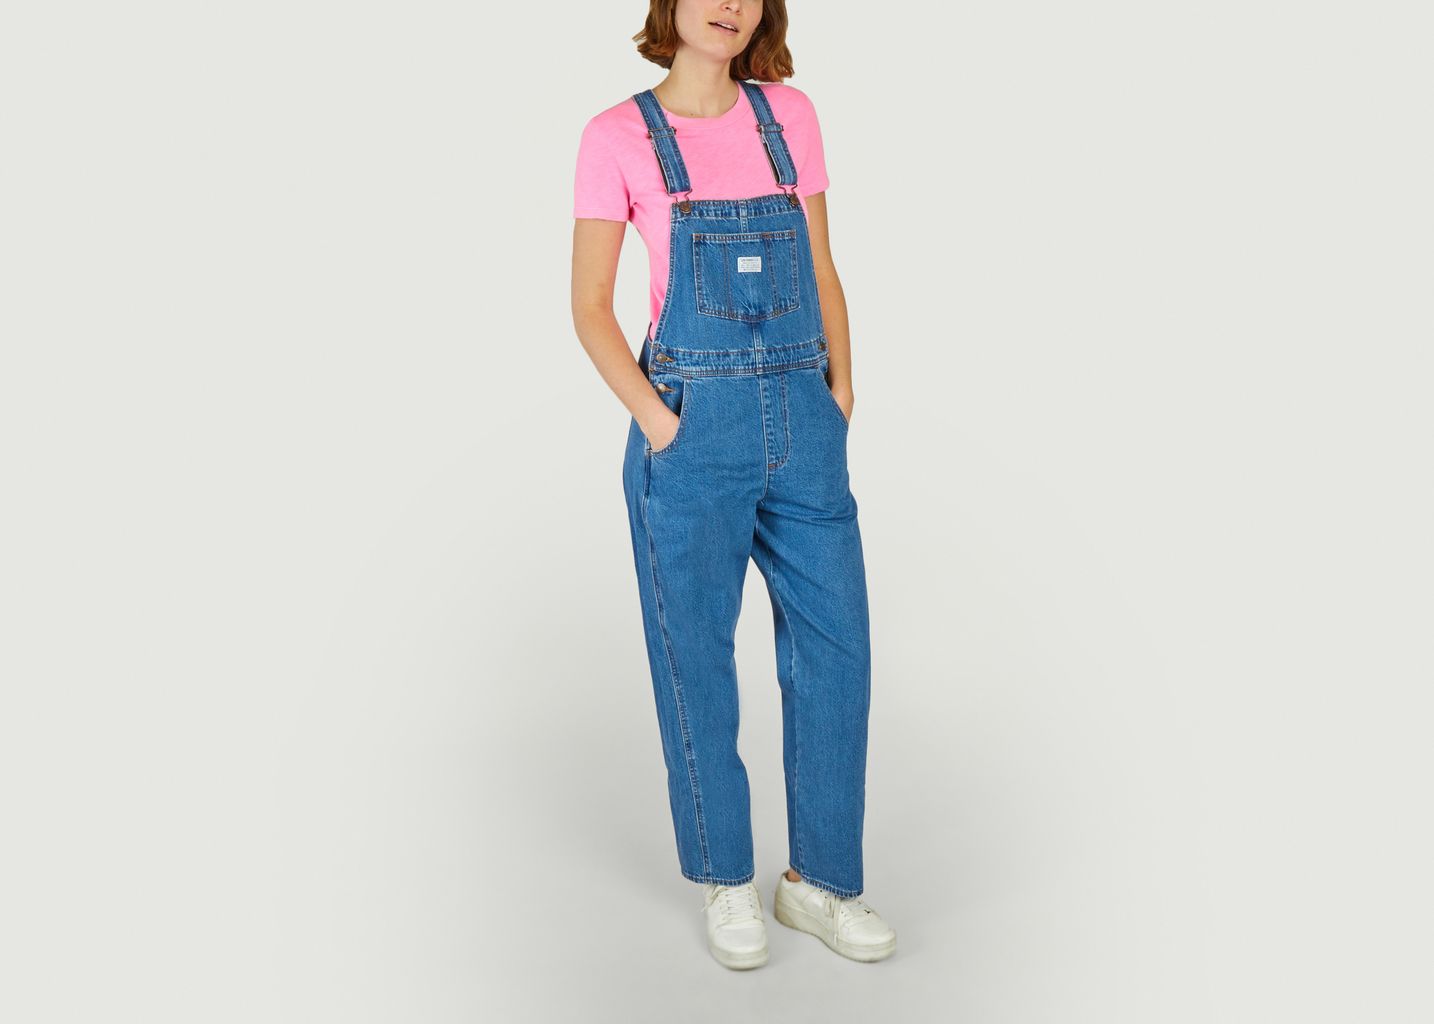 Vintage  dungarees - Levi's Red Tab